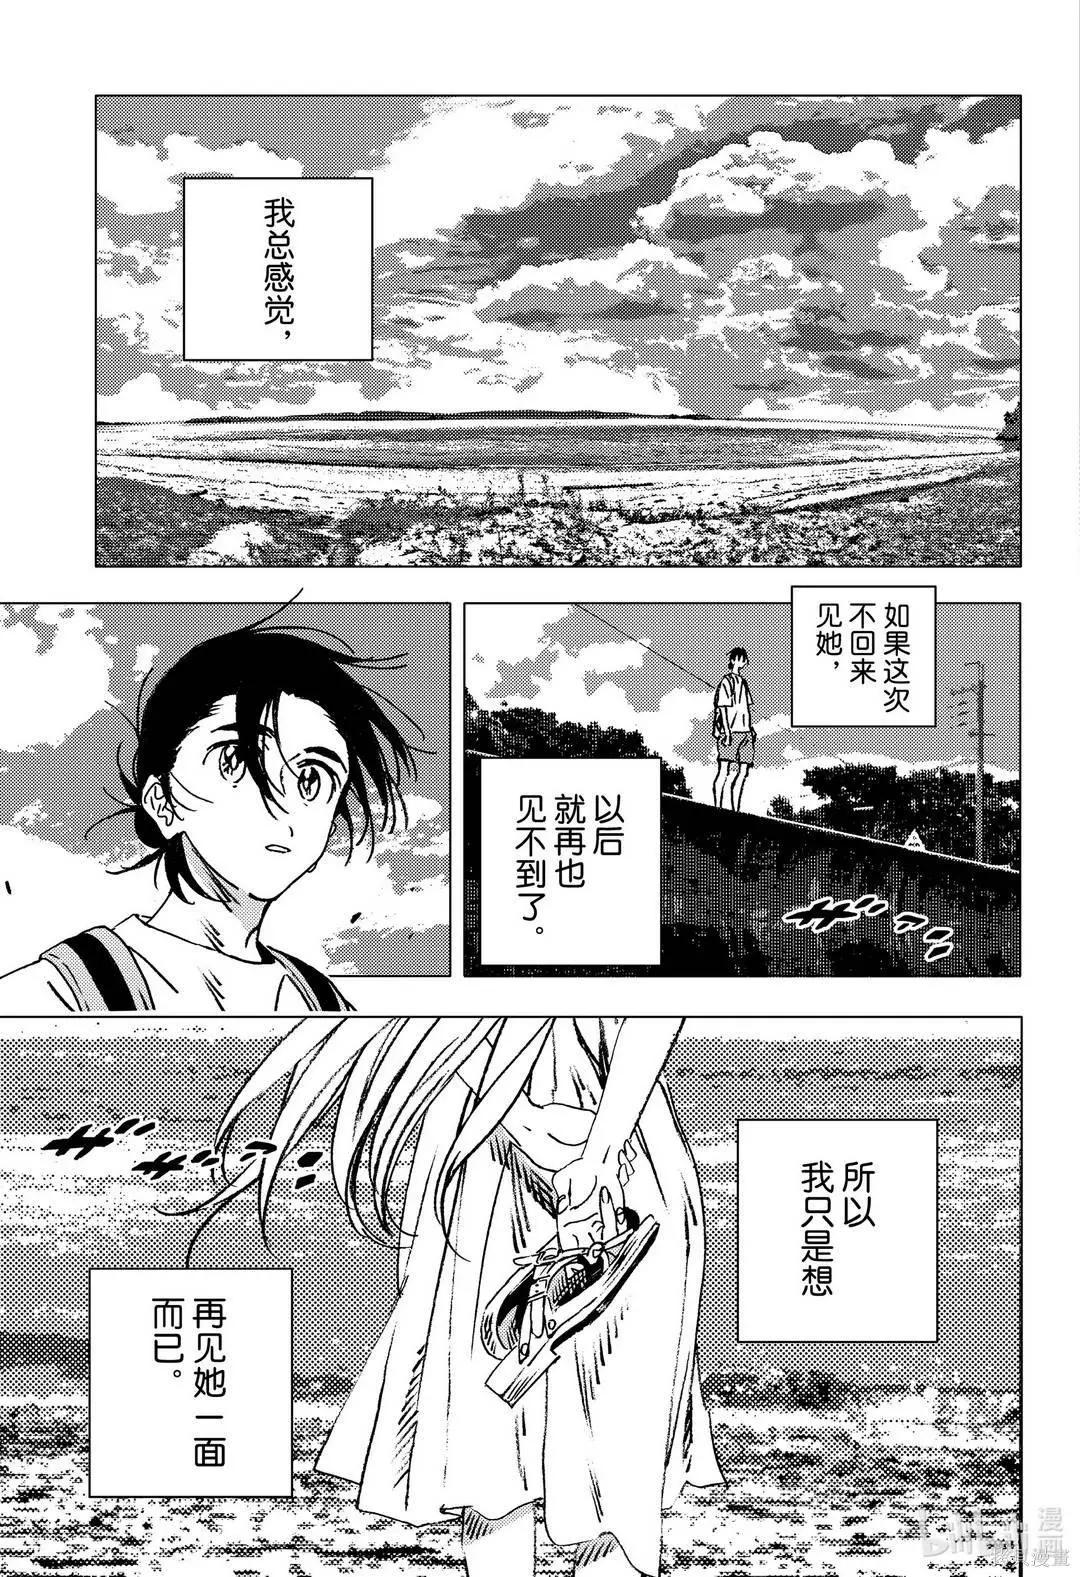 Summer time rendering - 第139话 - 3